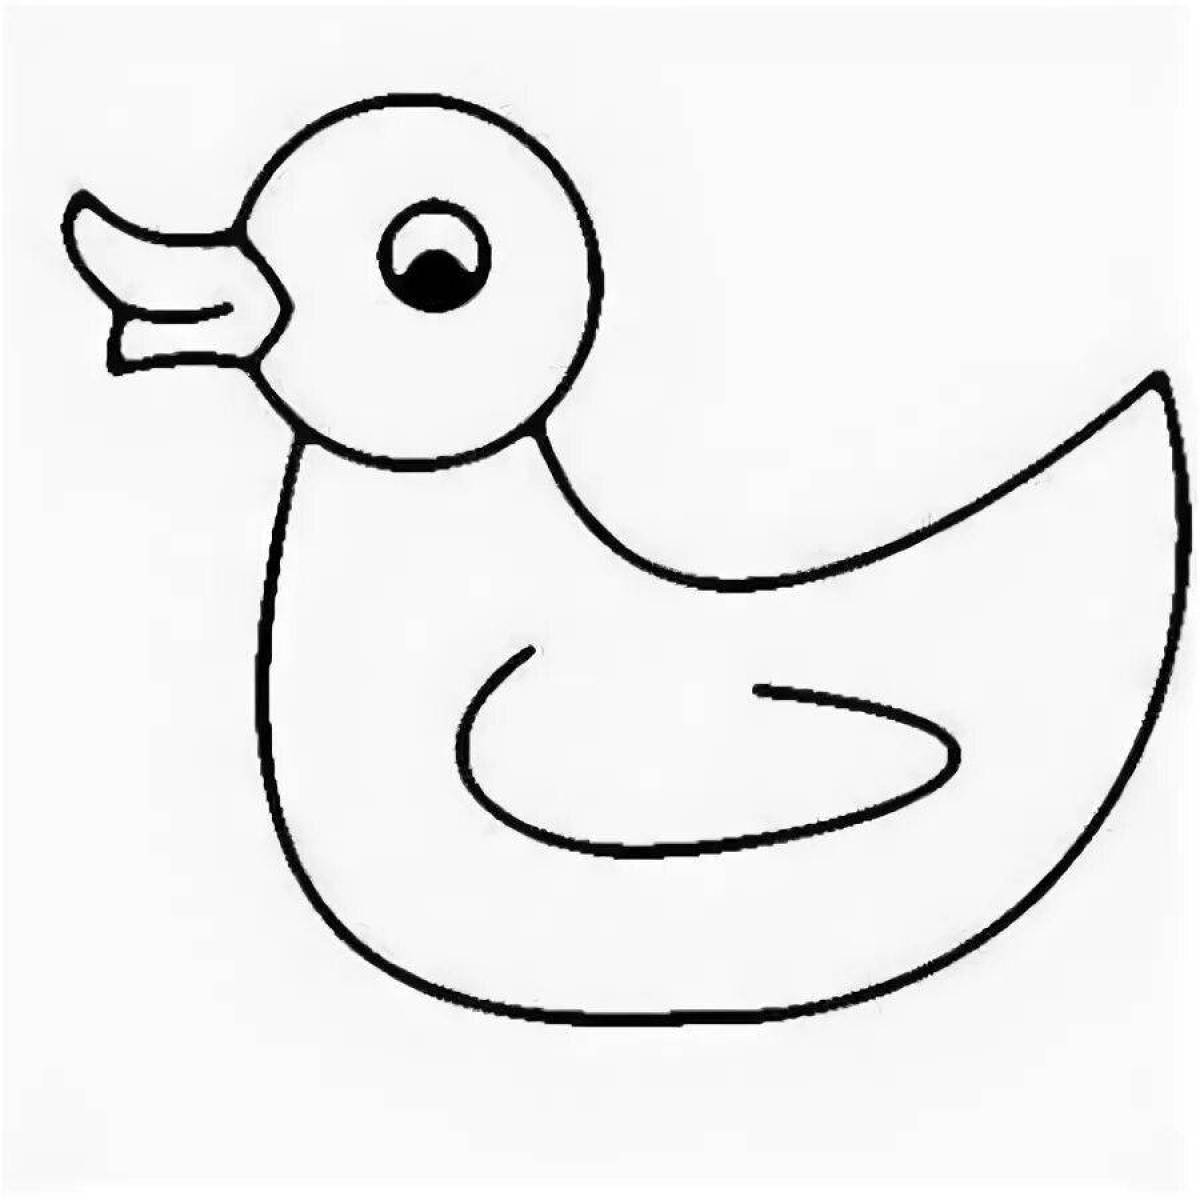 Charming Dymkovo duck, second youngest coloring page